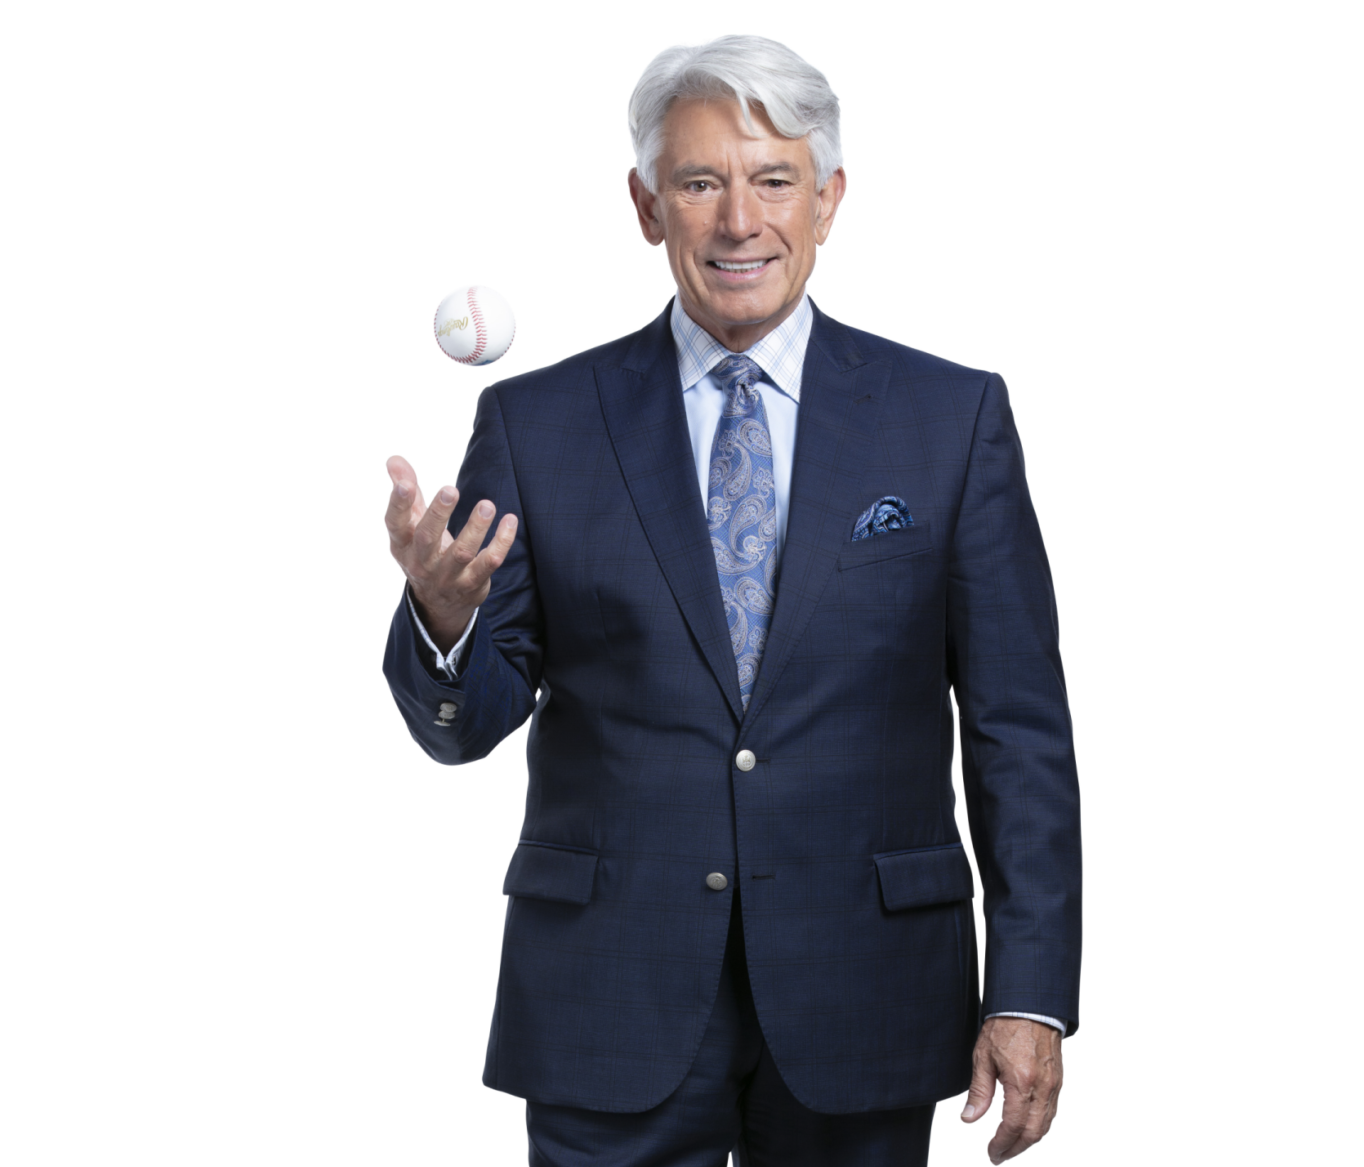 Interview with Buck Martinez: Let's Play Ball!